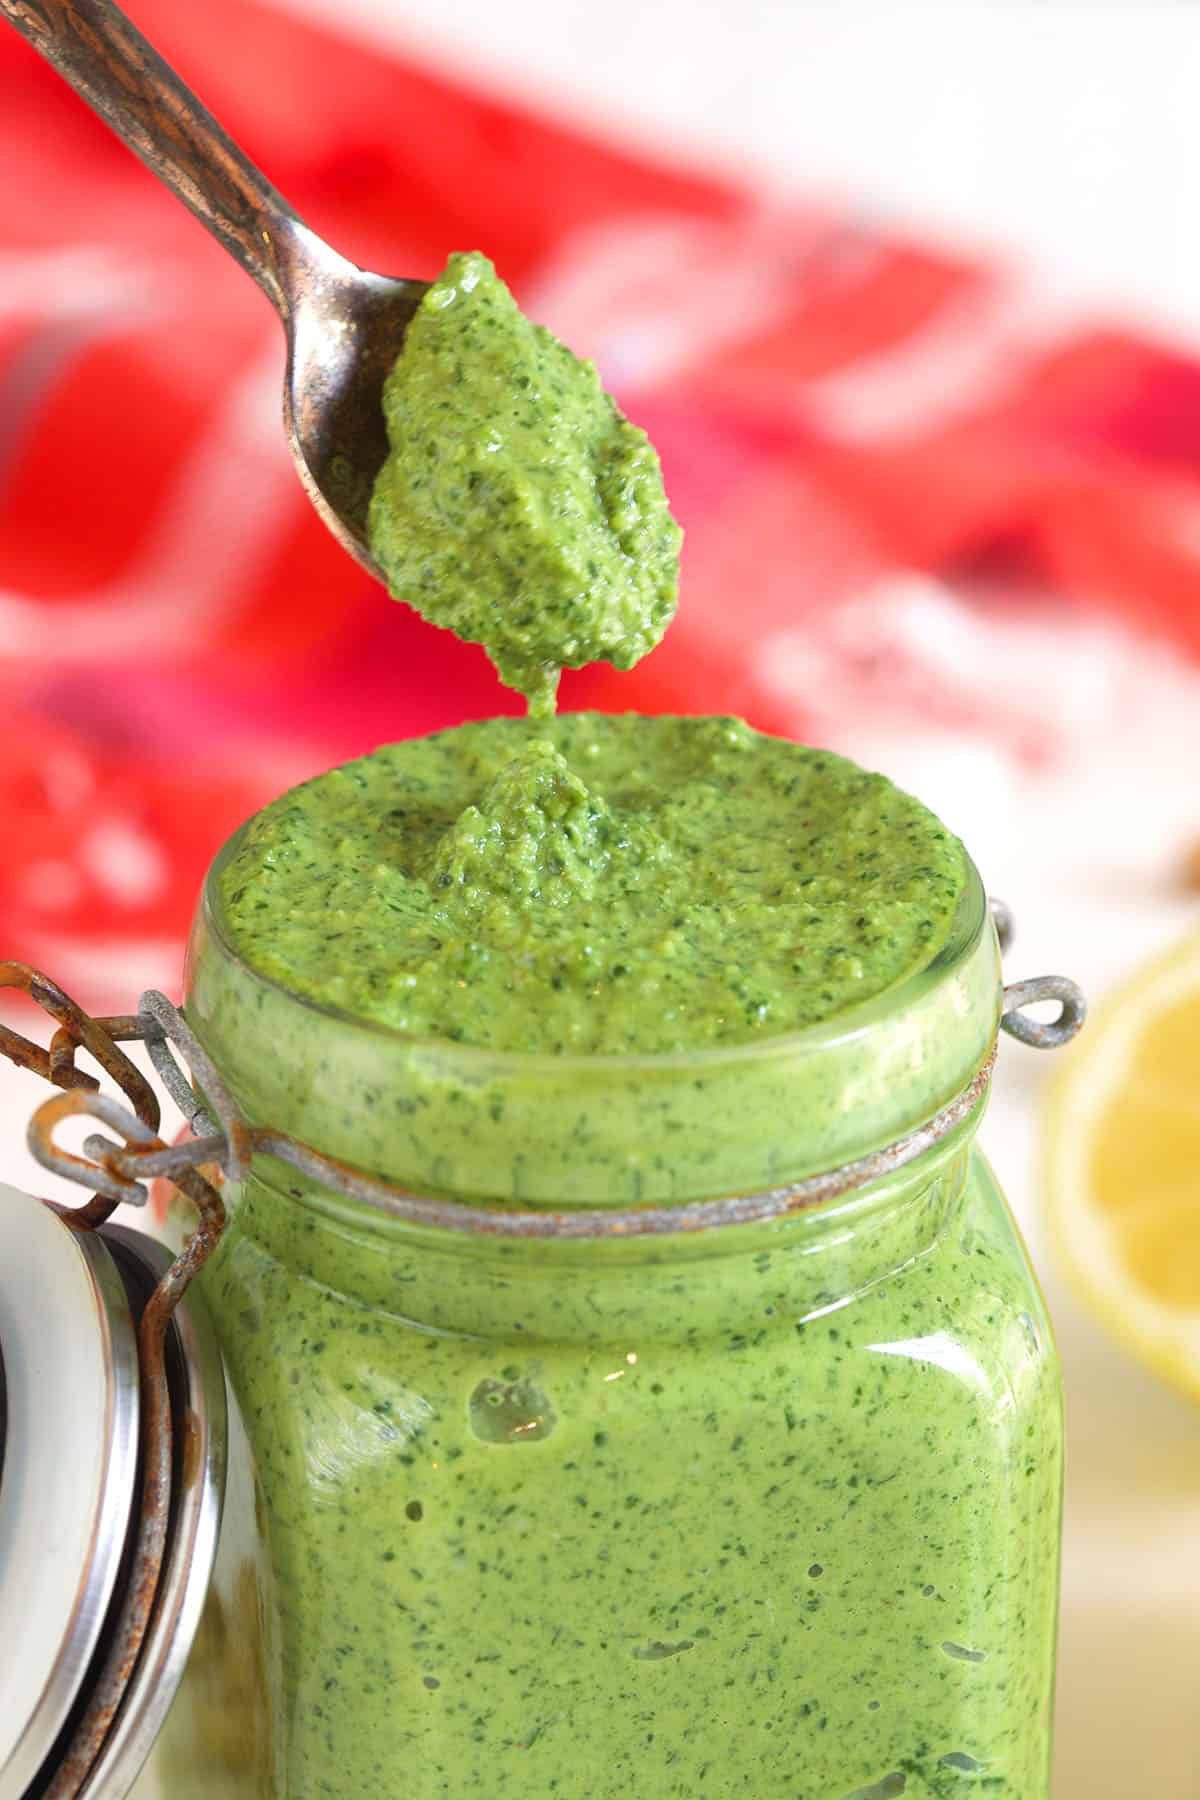 A spoon is lifting a small portion of pesto from the jar.